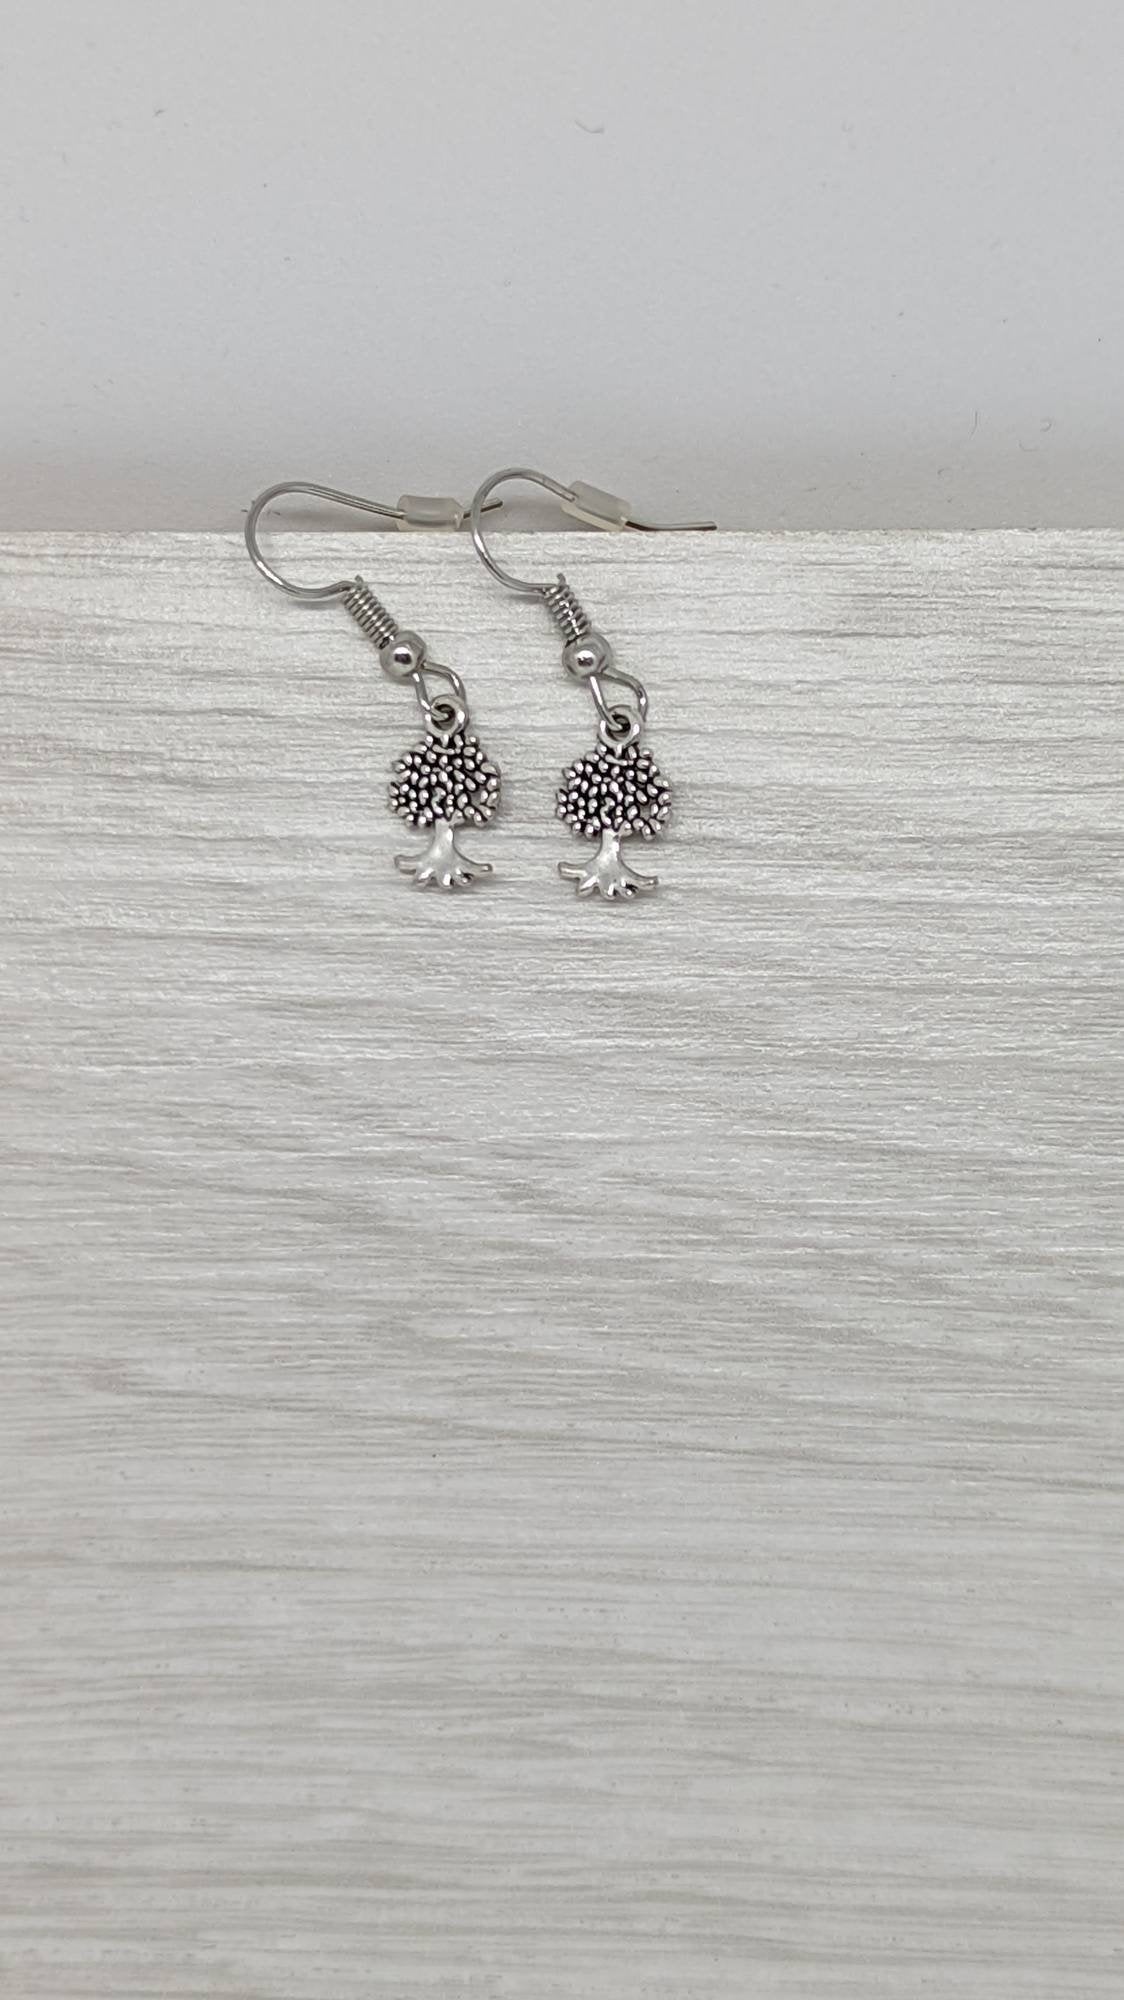 small tree earrings, nature jewellery, dainty earrings, silver tree, gift for her, birthday gift